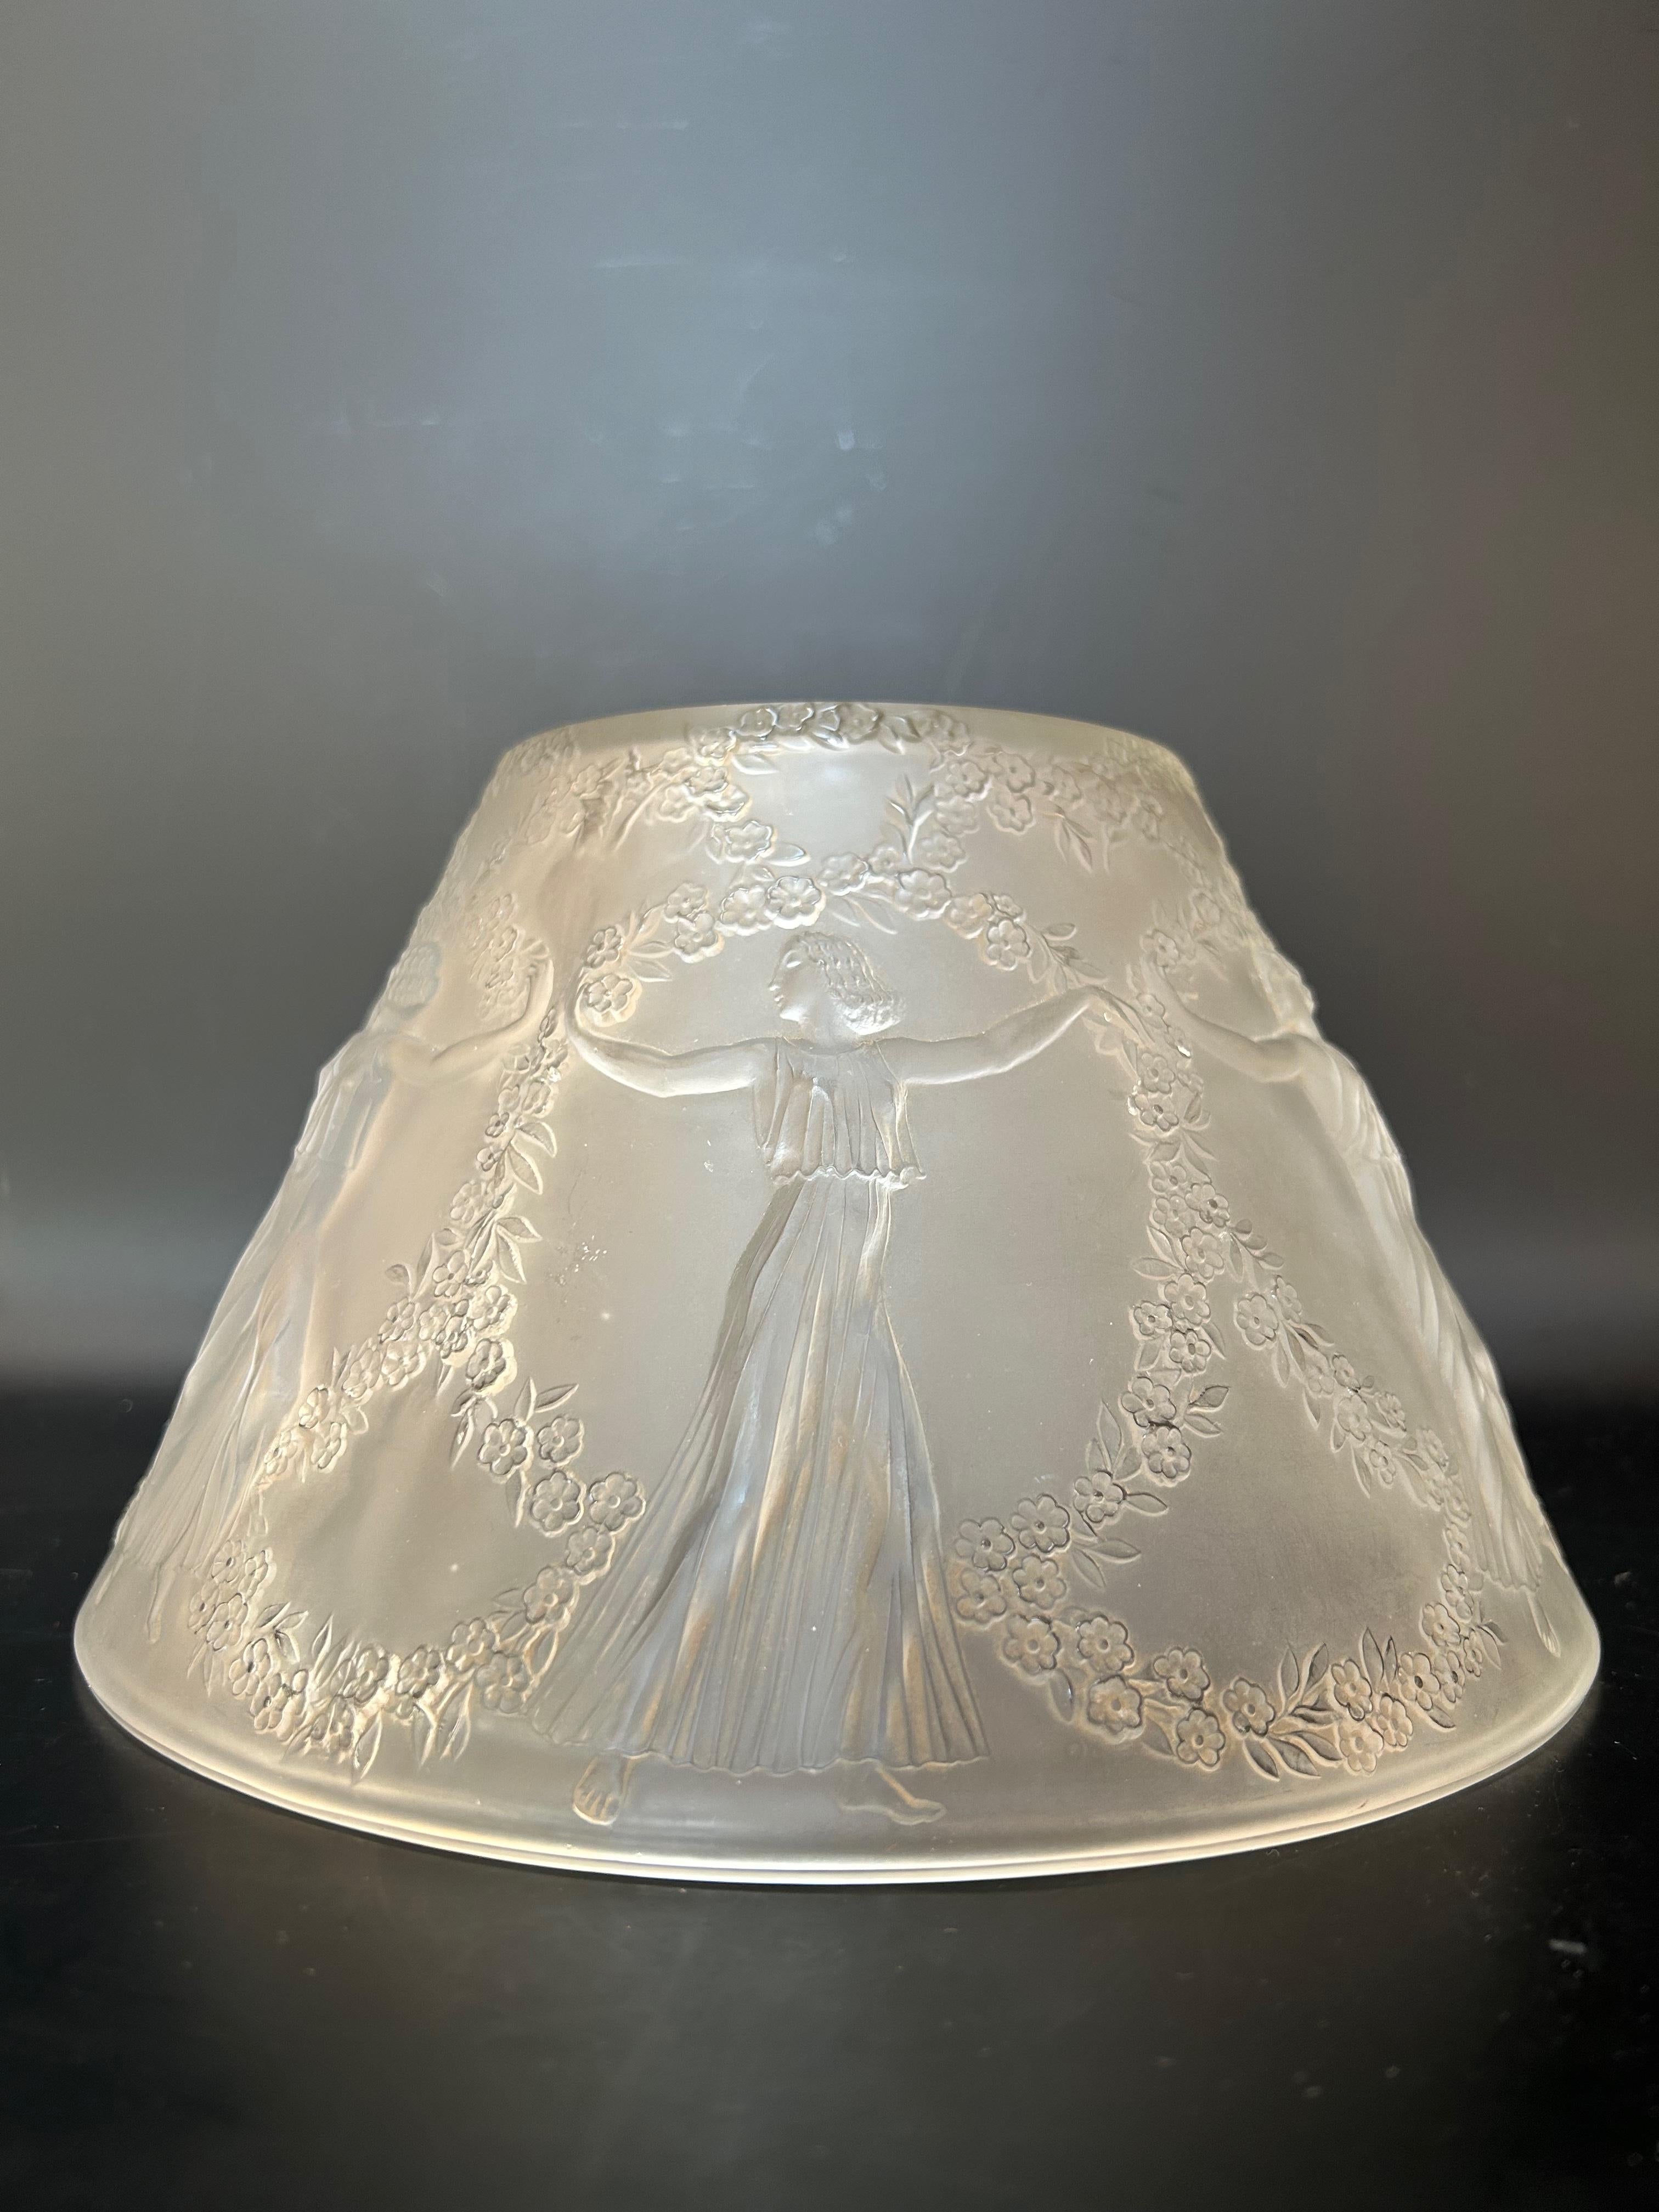 “6 Dancers” lamp cover by René Lalique.
Model created on August 18, 1931.
In perfect condition.
Height: 13.4cm
Diameter: 32.7 cm
Weight: 1.5 Kg

Born in 1860 in Aÿ in Champagne, René Lalique emerged among the greatest of his time, whether as a